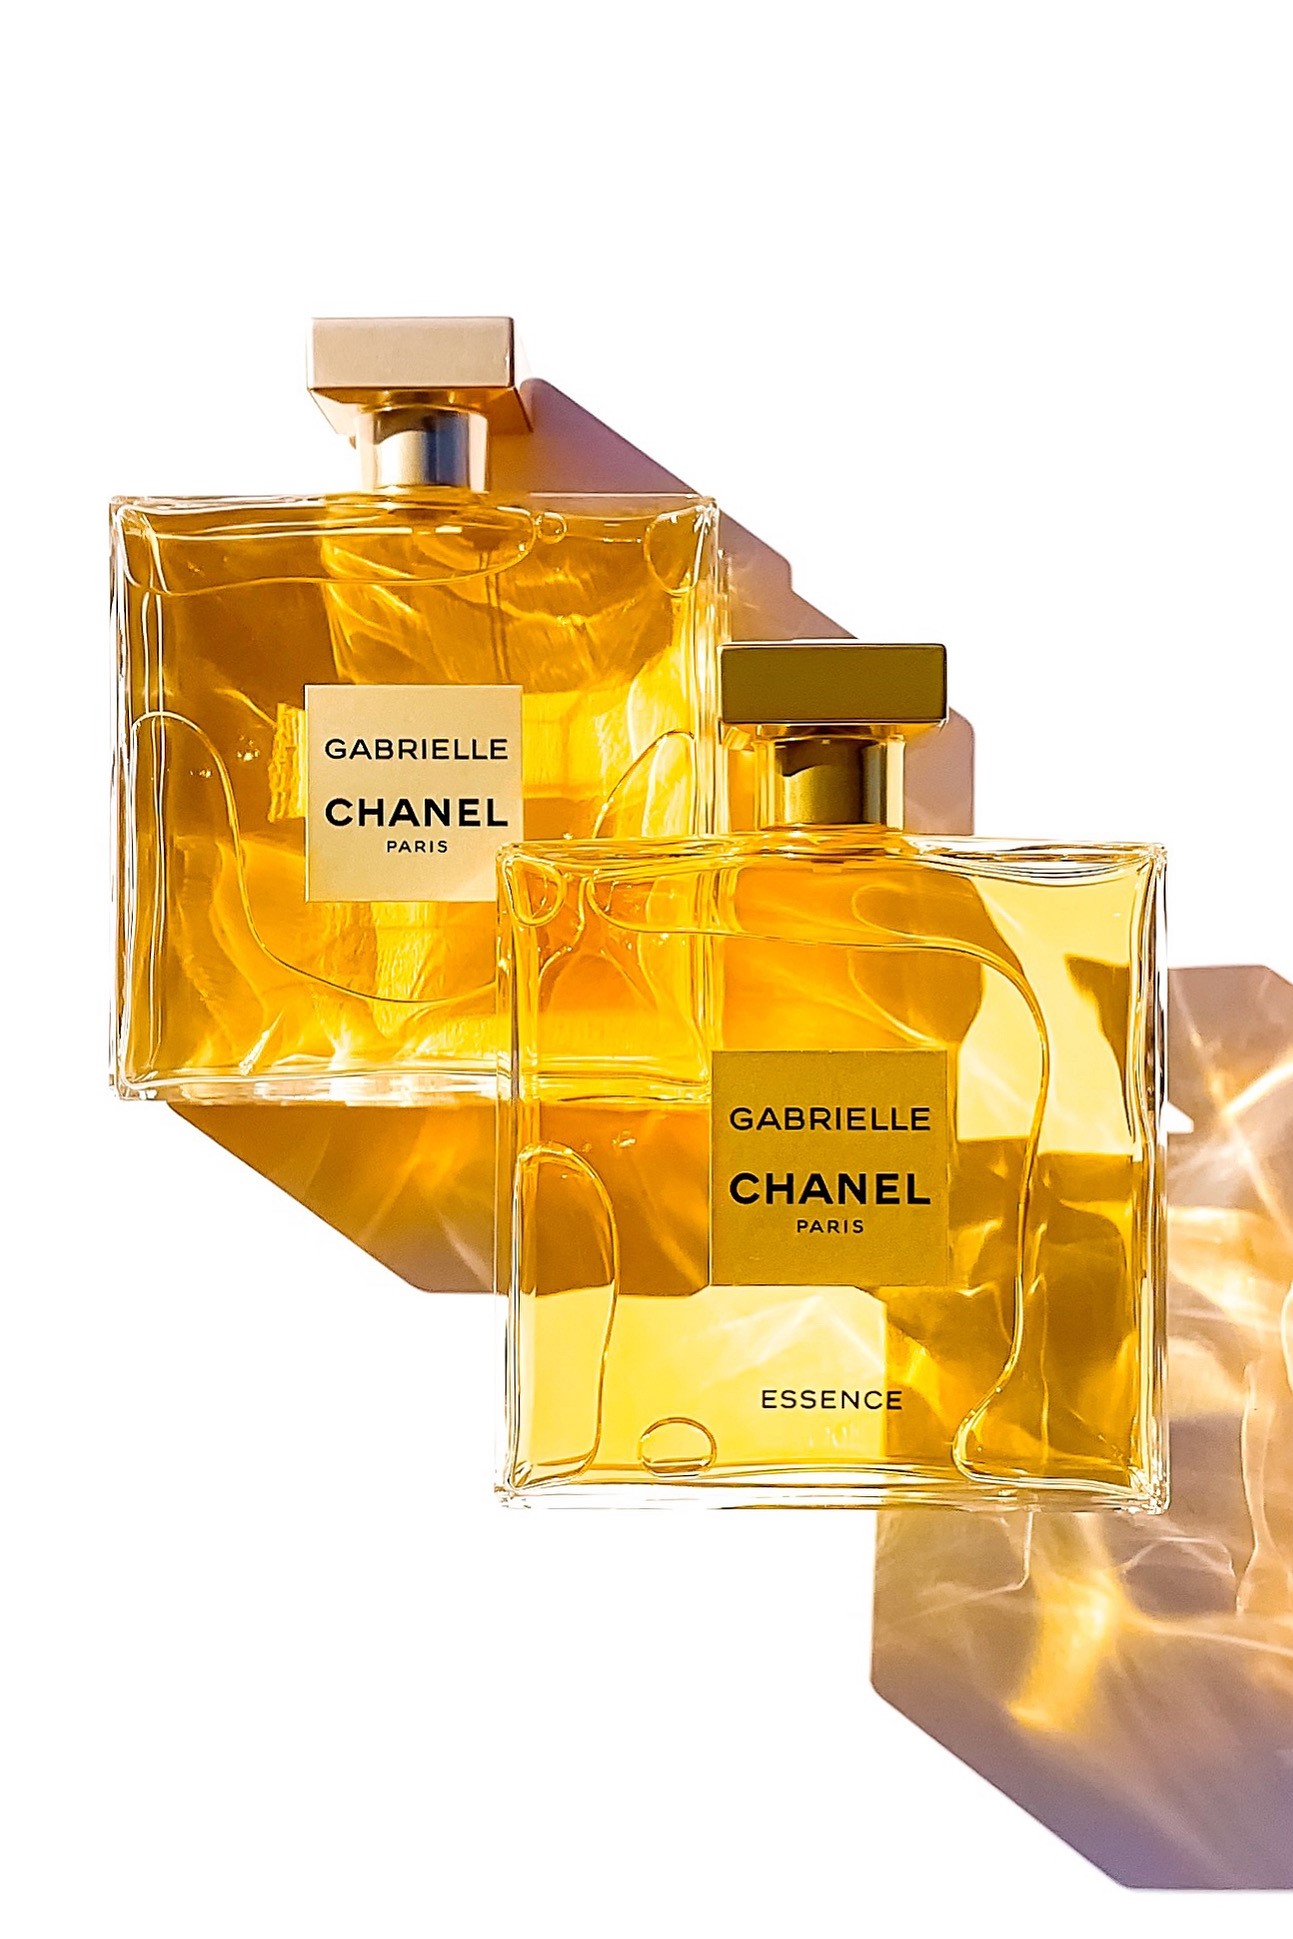 The Two Faces of Gabrielle Chanel - eauxSILLAGE